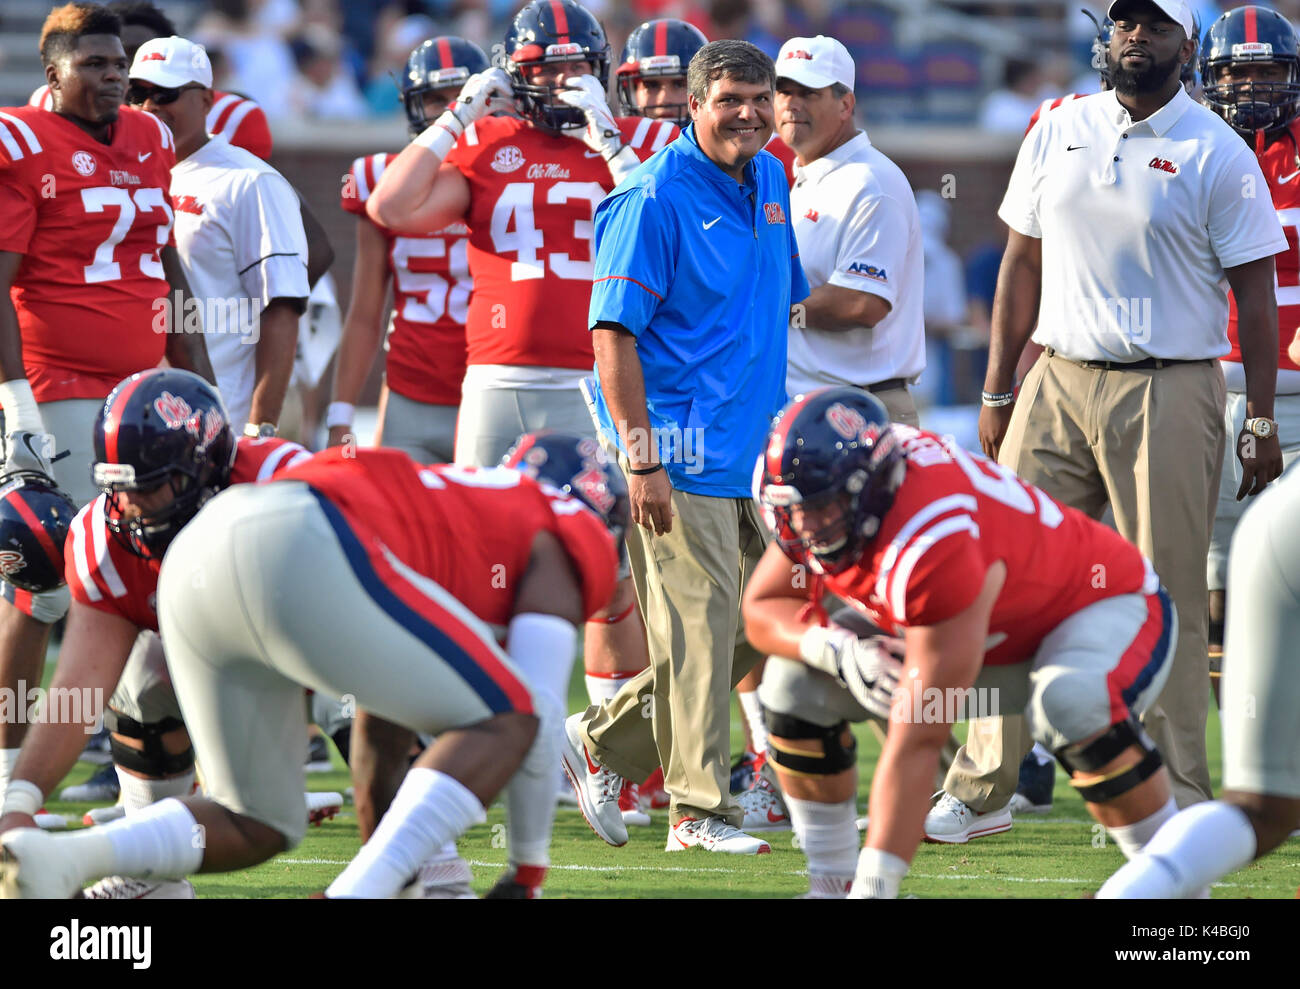 Oxford, MS, USA. 2nd Sep, 2017. Mississippi interim coach Matt Luke (center) smiles as he watches his players go through pre game warm ups before a NCAA college football game against South Alabama at Vaught-Hemmingway Stadium in Oxford, MS. Mississippi won 47-27. Austin McAfee/CSM/Alamy Live News Stock Photo